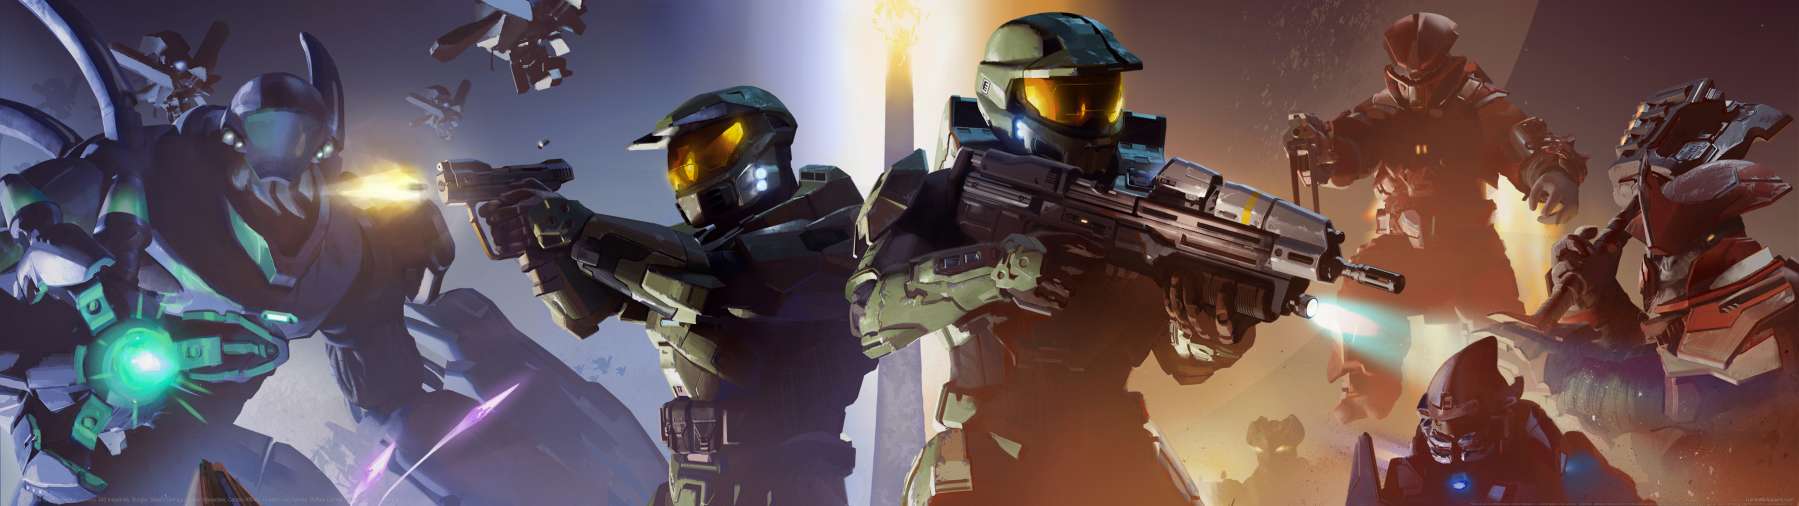 Halo: The Master Chief Collection superwide achtergrond 03